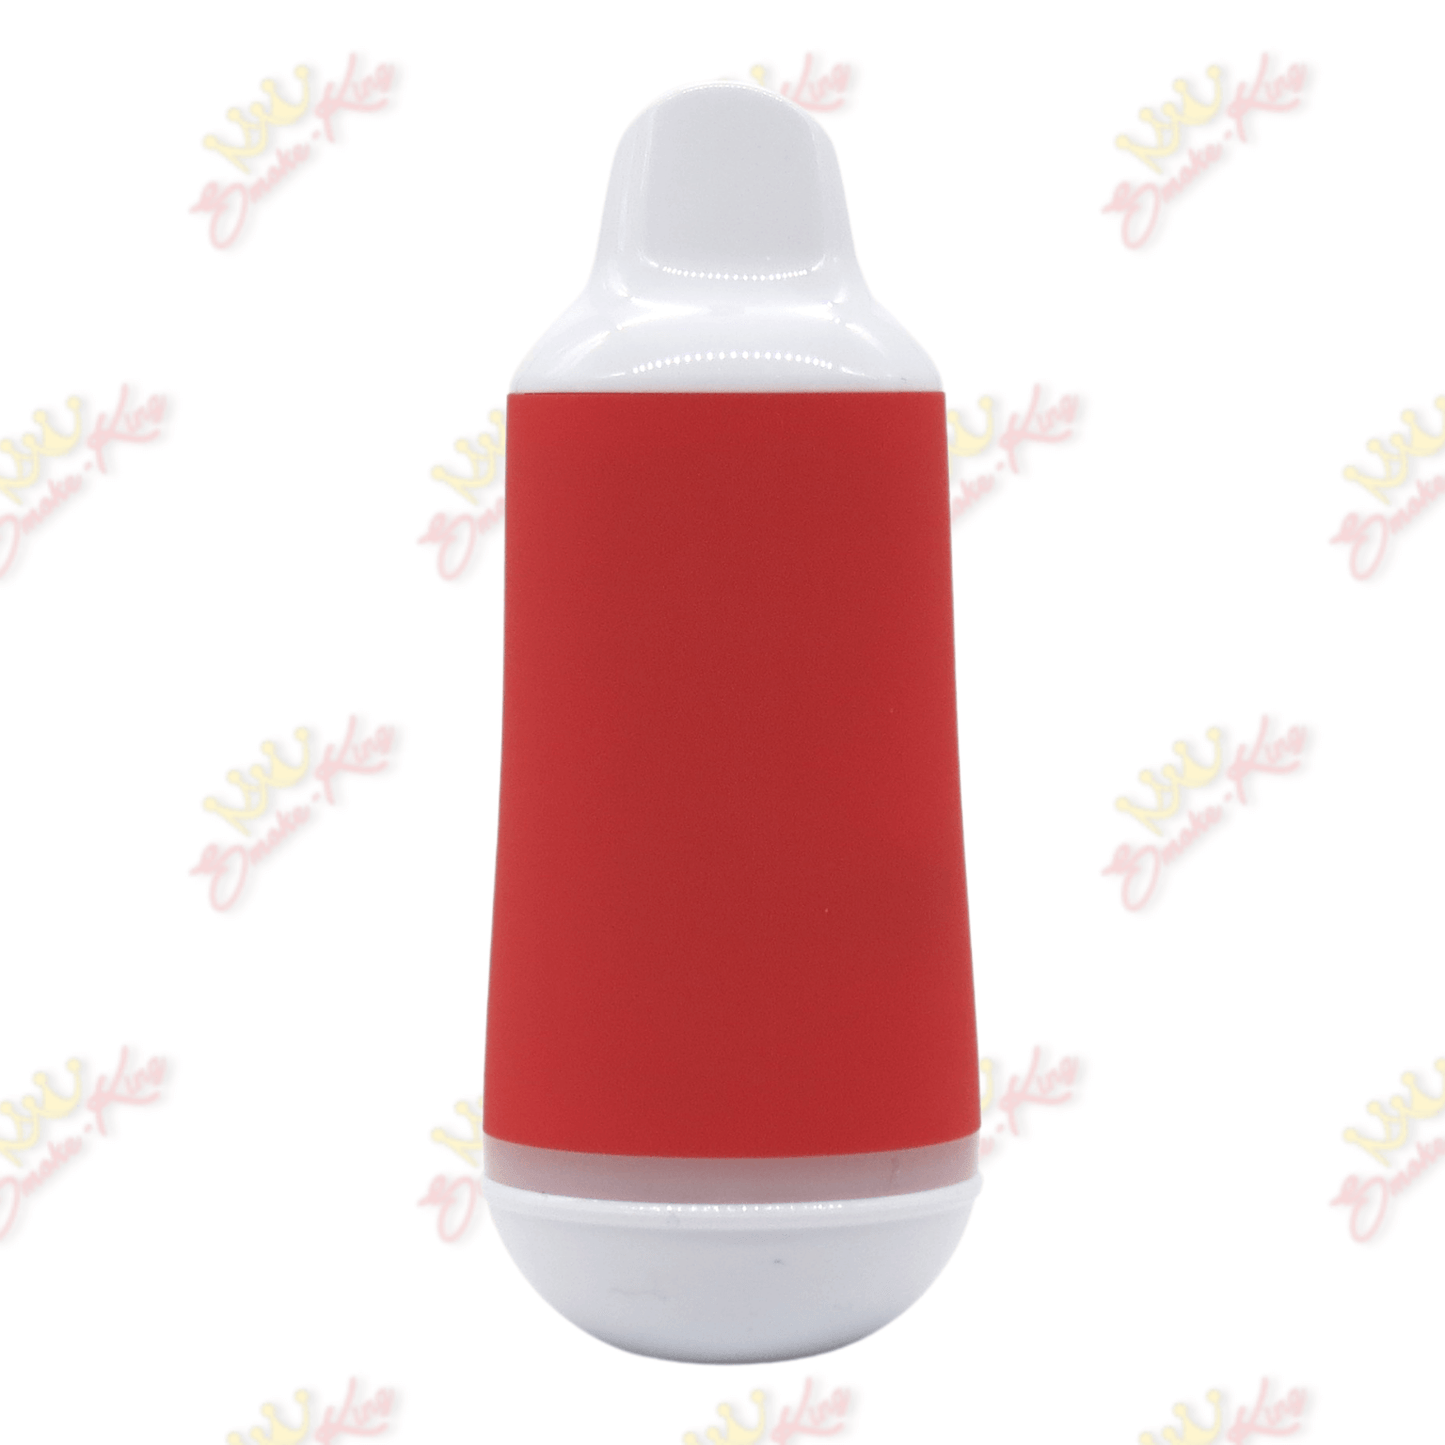 Dazzleaf Red Cannbell Discreet Battery Cannbell Discreet Battery| Cartridge Battery | Smoke-King